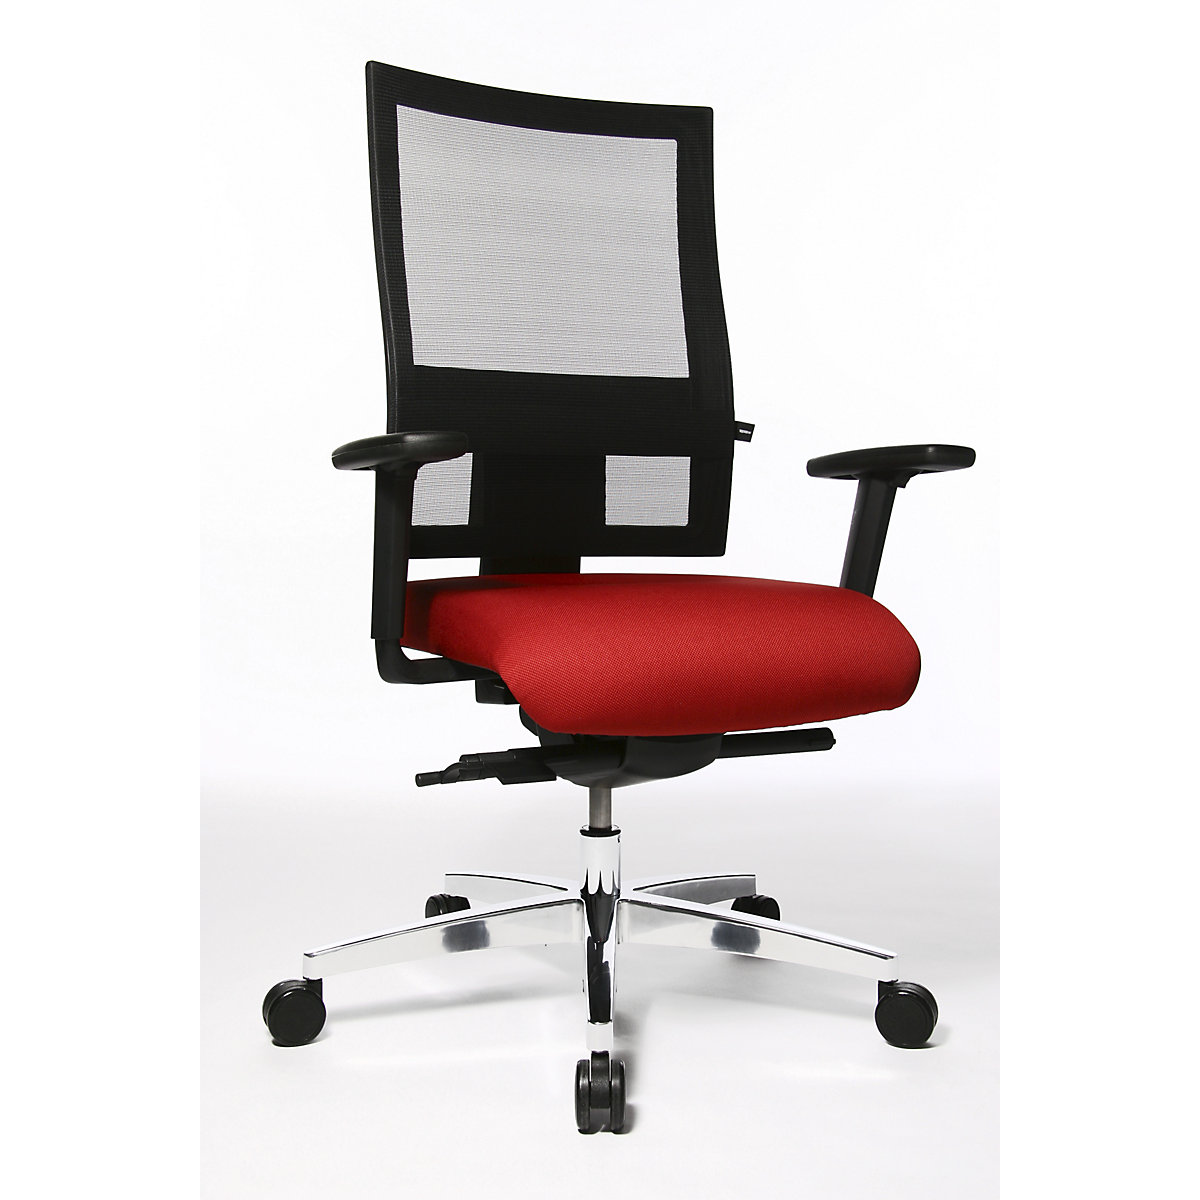 PROFI NET 11 office swivel chair – Topstar, height adjustable arm rests with soft padding, red-2